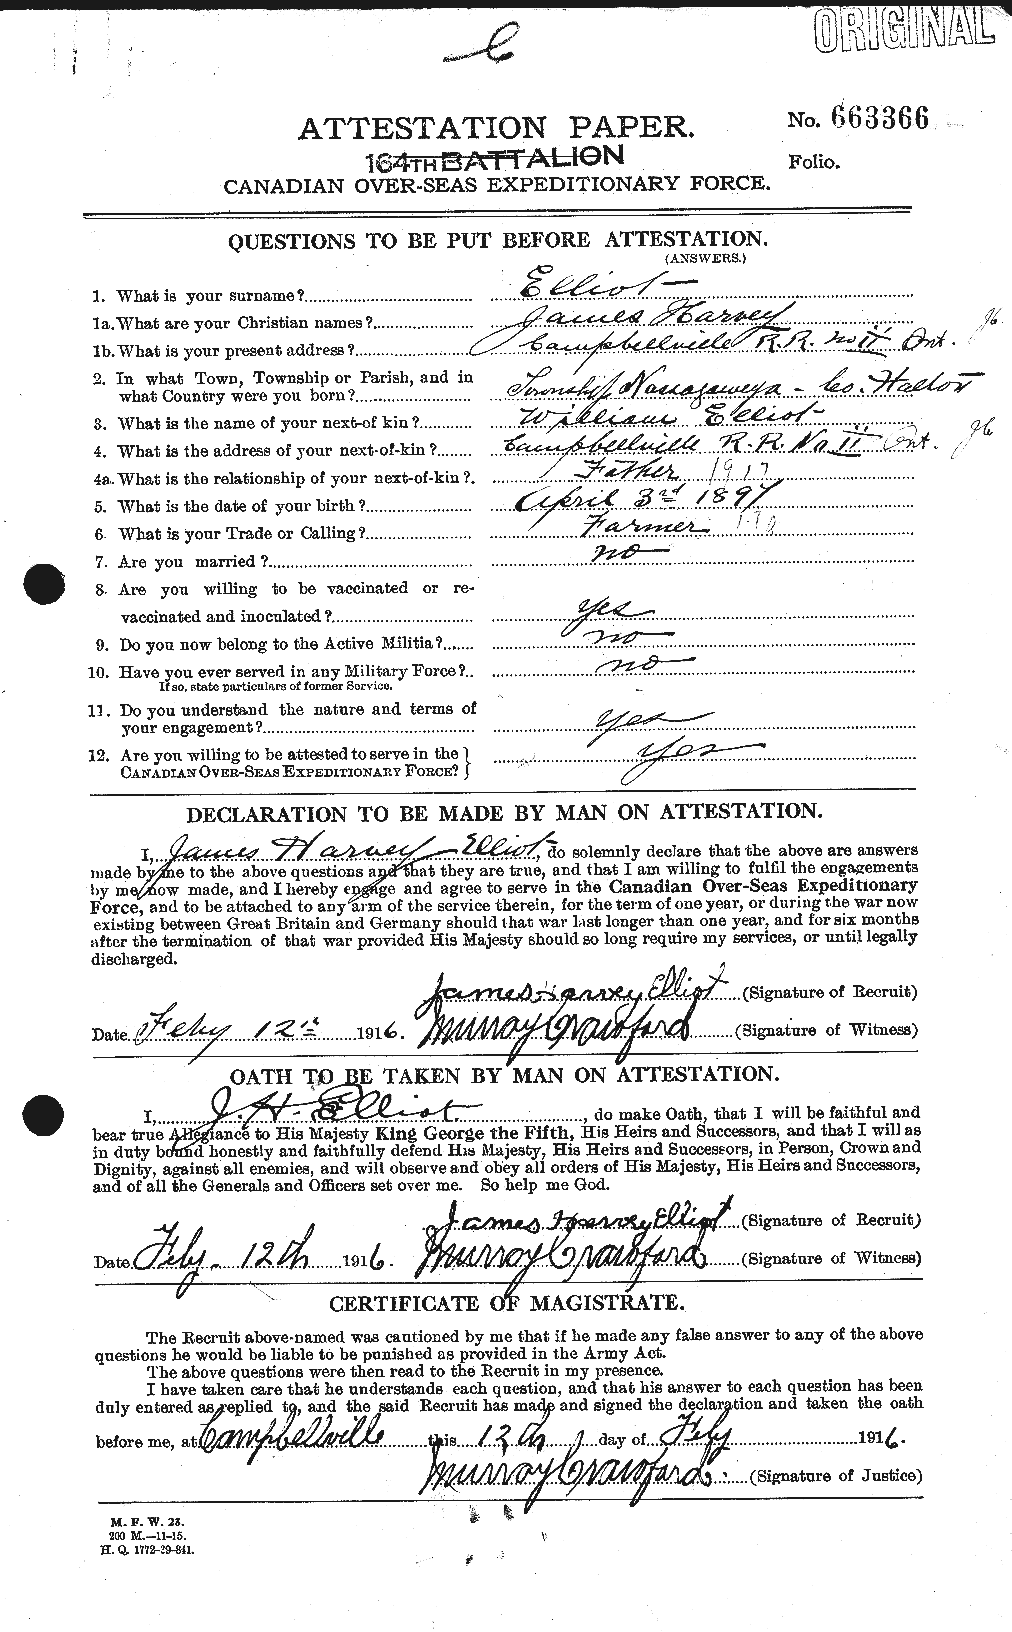 Personnel Records of the First World War - CEF 310769a